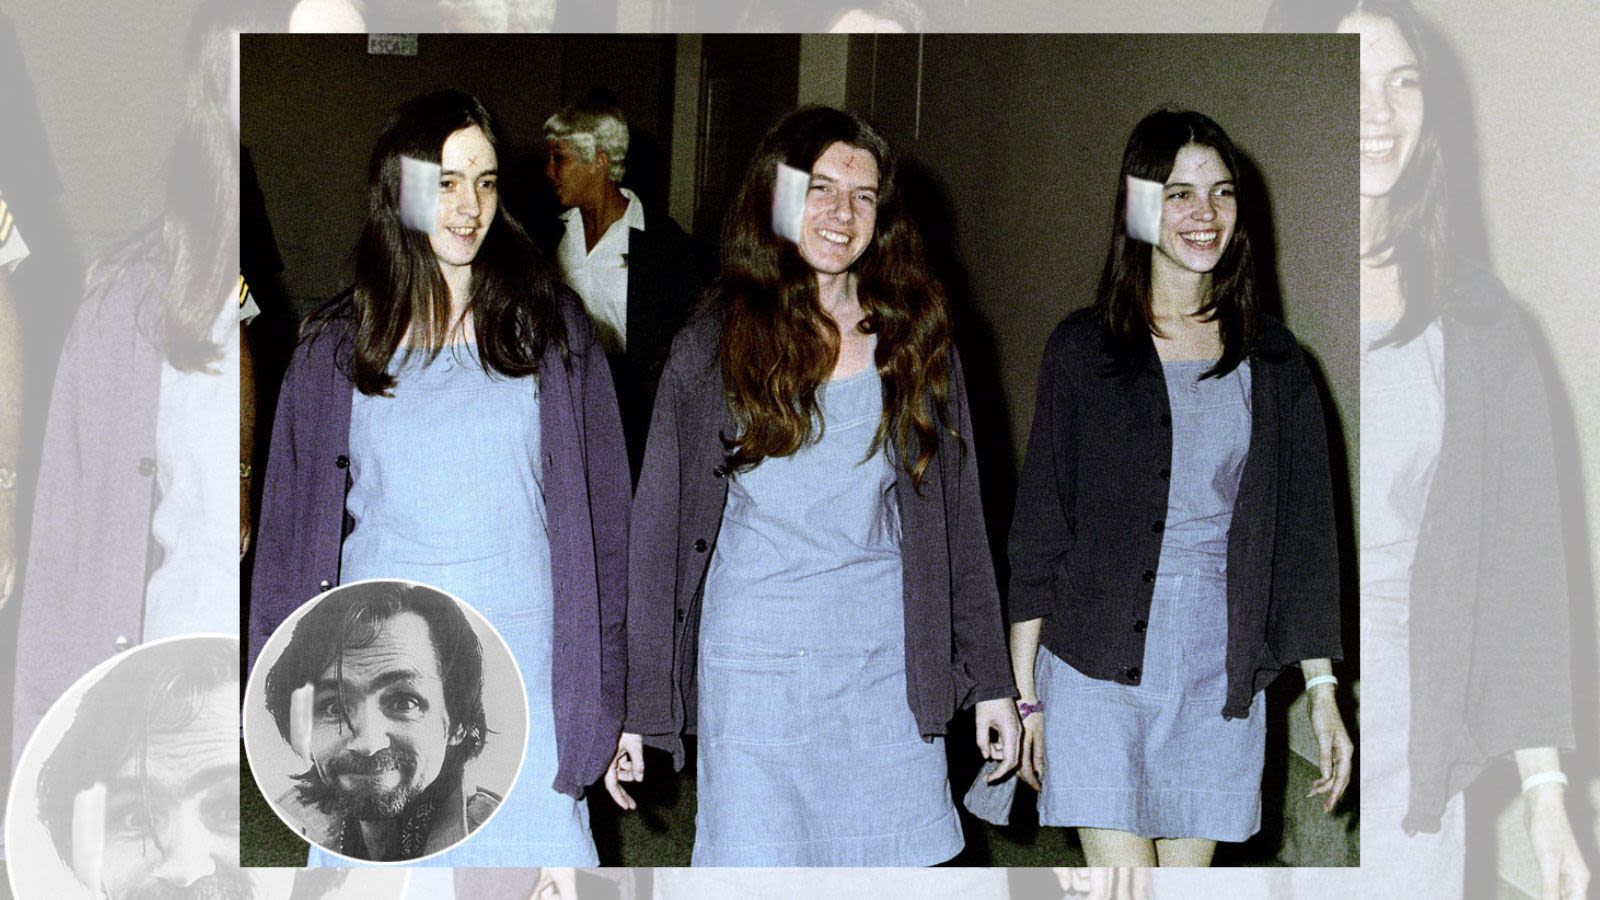 Fact Check: Manson Family Photo Was Digitally Manipulated to Add Ear Bandages